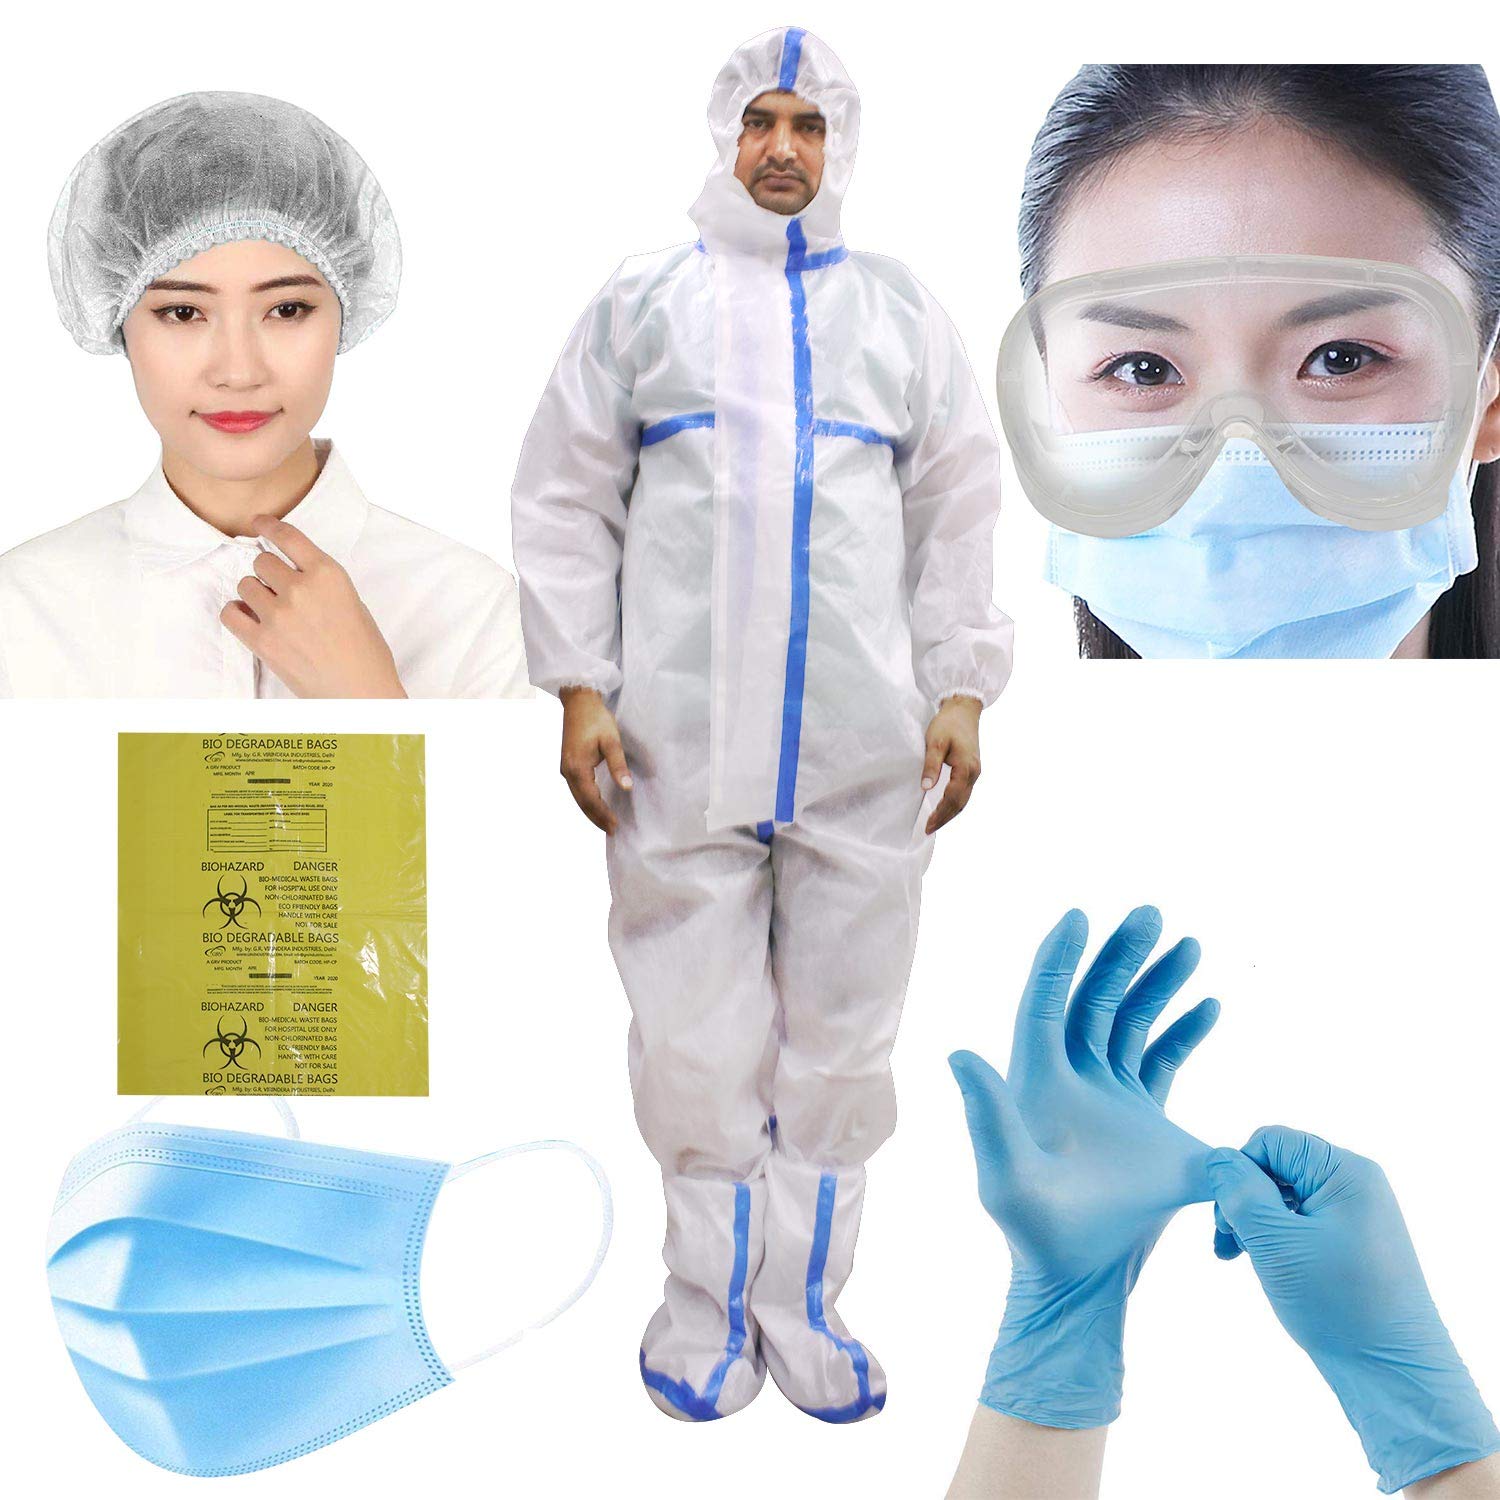 COMPLETE BODY PROTECTION KIT